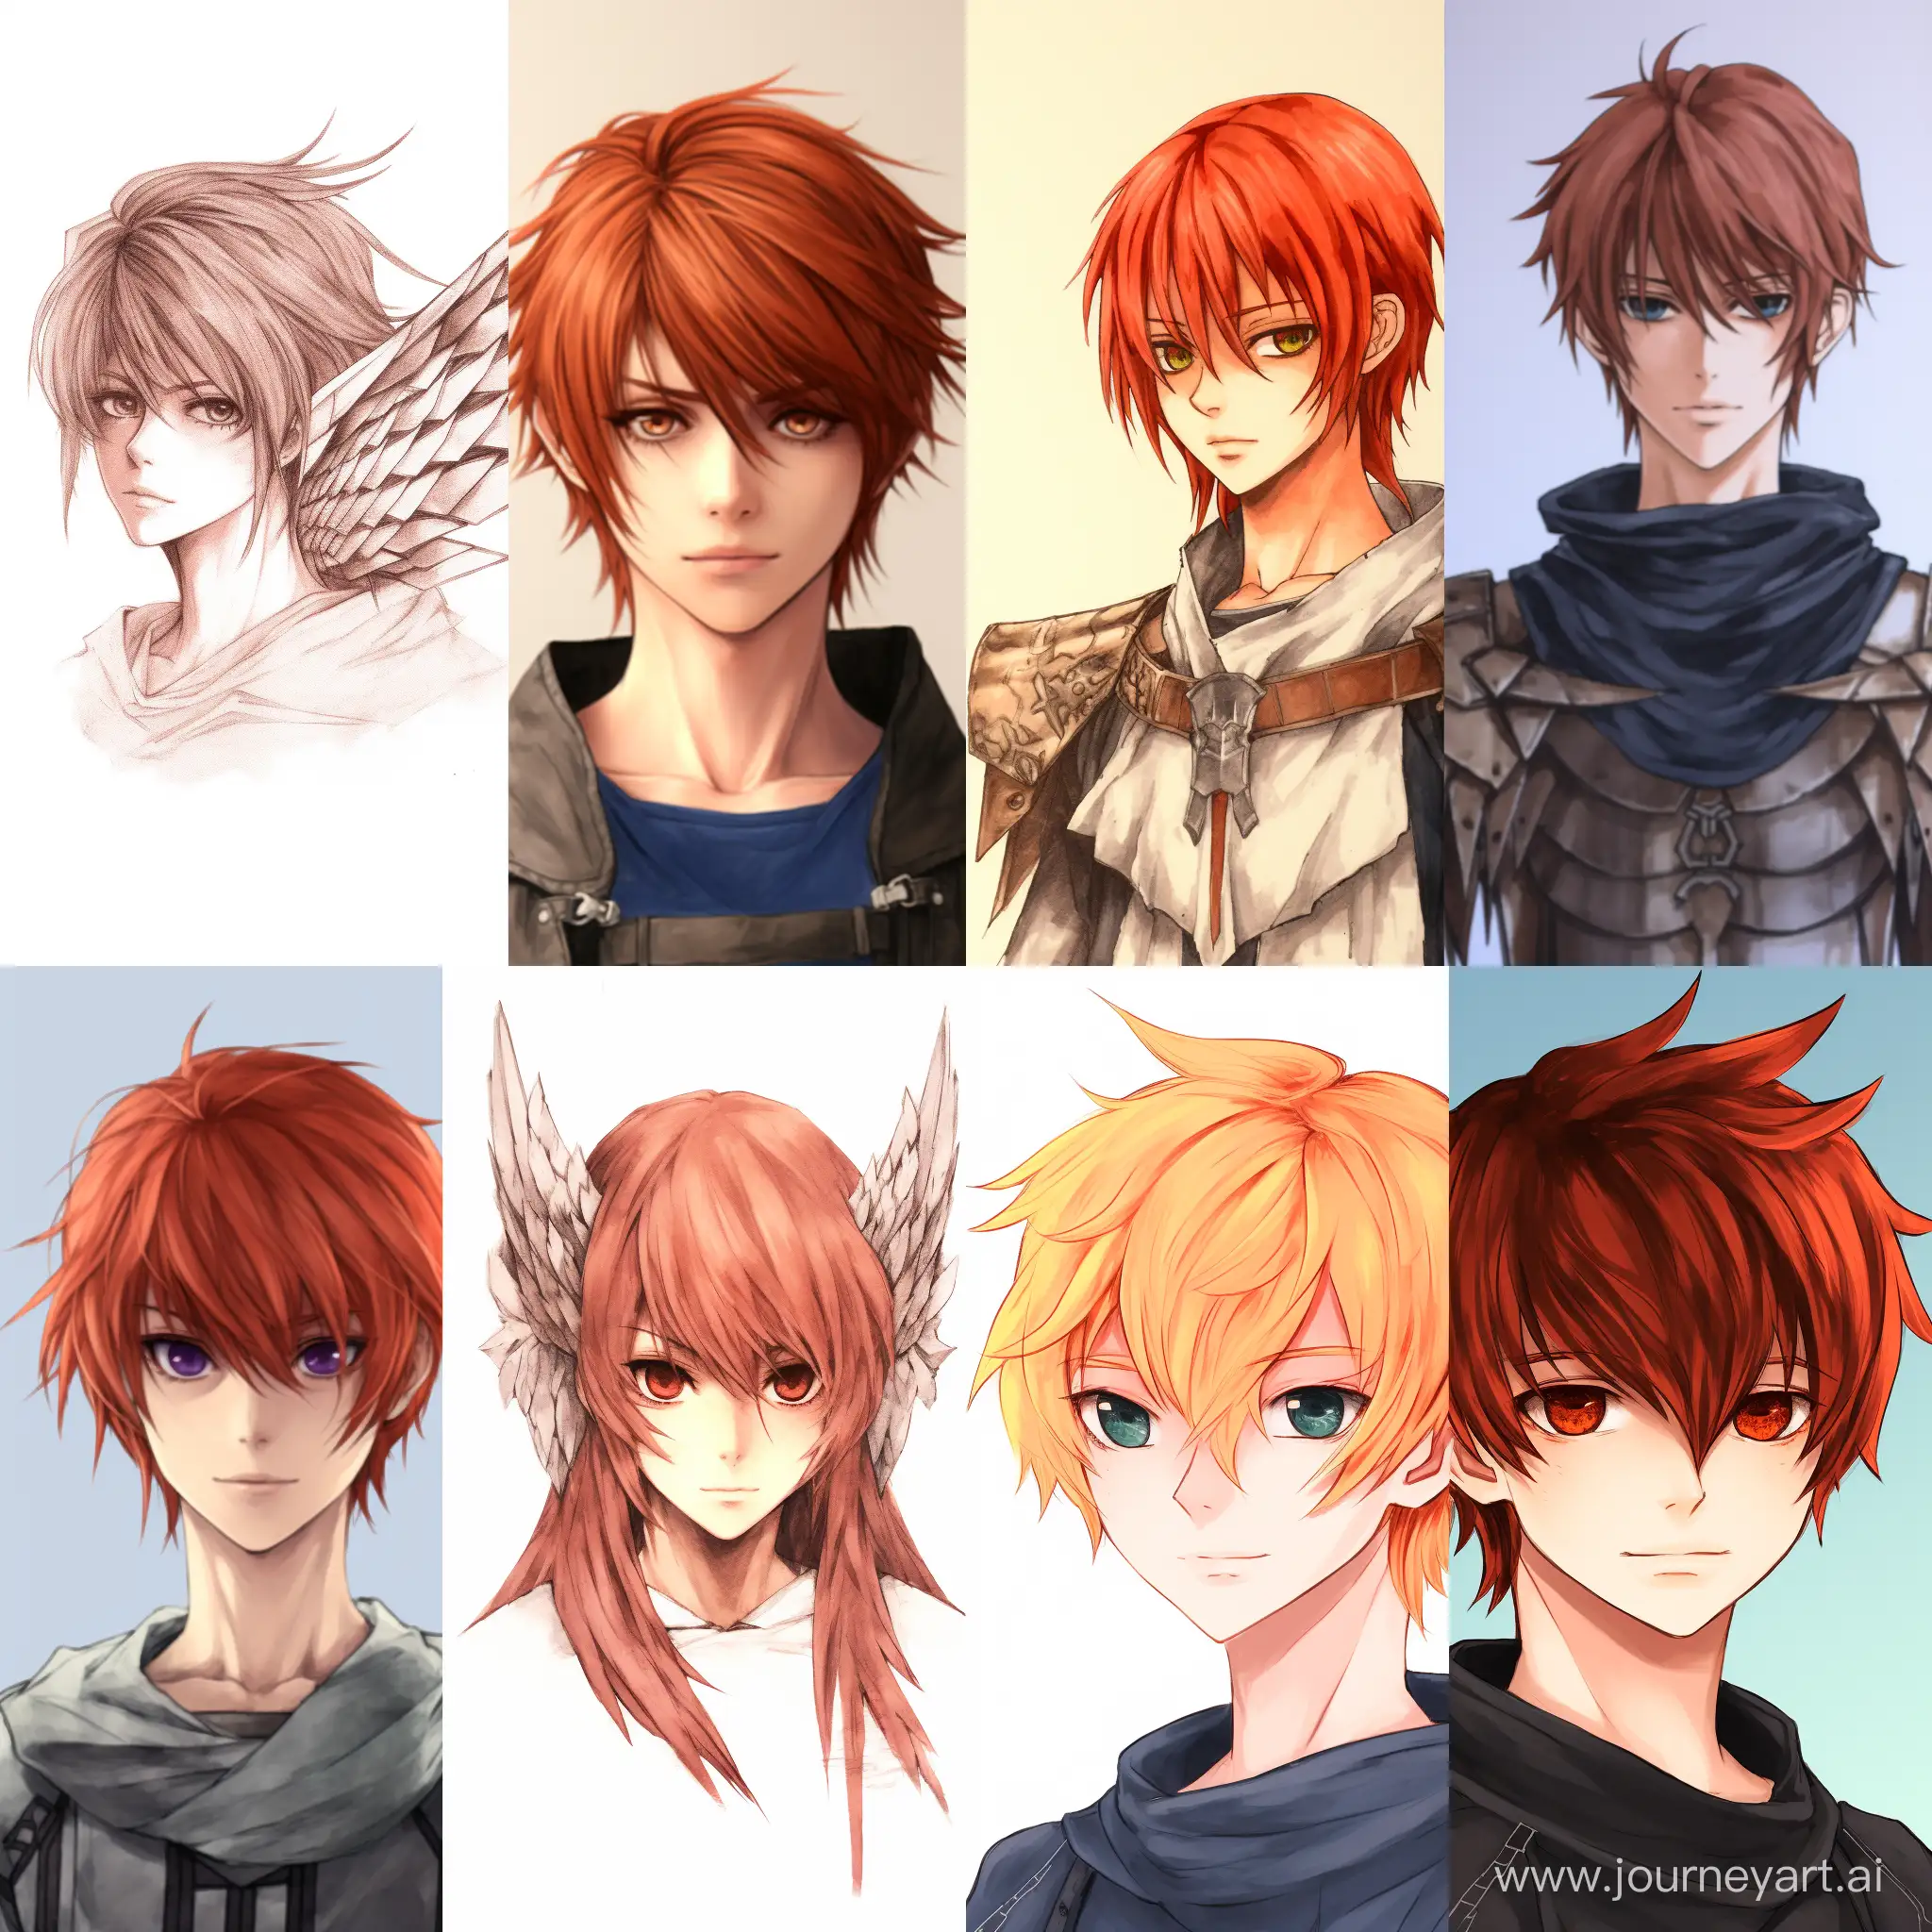 anime style, Anime, Anime drawing, Simple drawing, The left side is red hair, The right side is brown hair, Eyes without pupils, Short hair - square, The Wings of the Archangel, Minimalistic background, a masterpiece of quality, the best quality, masterpiece angles, a masterpiece drawing.